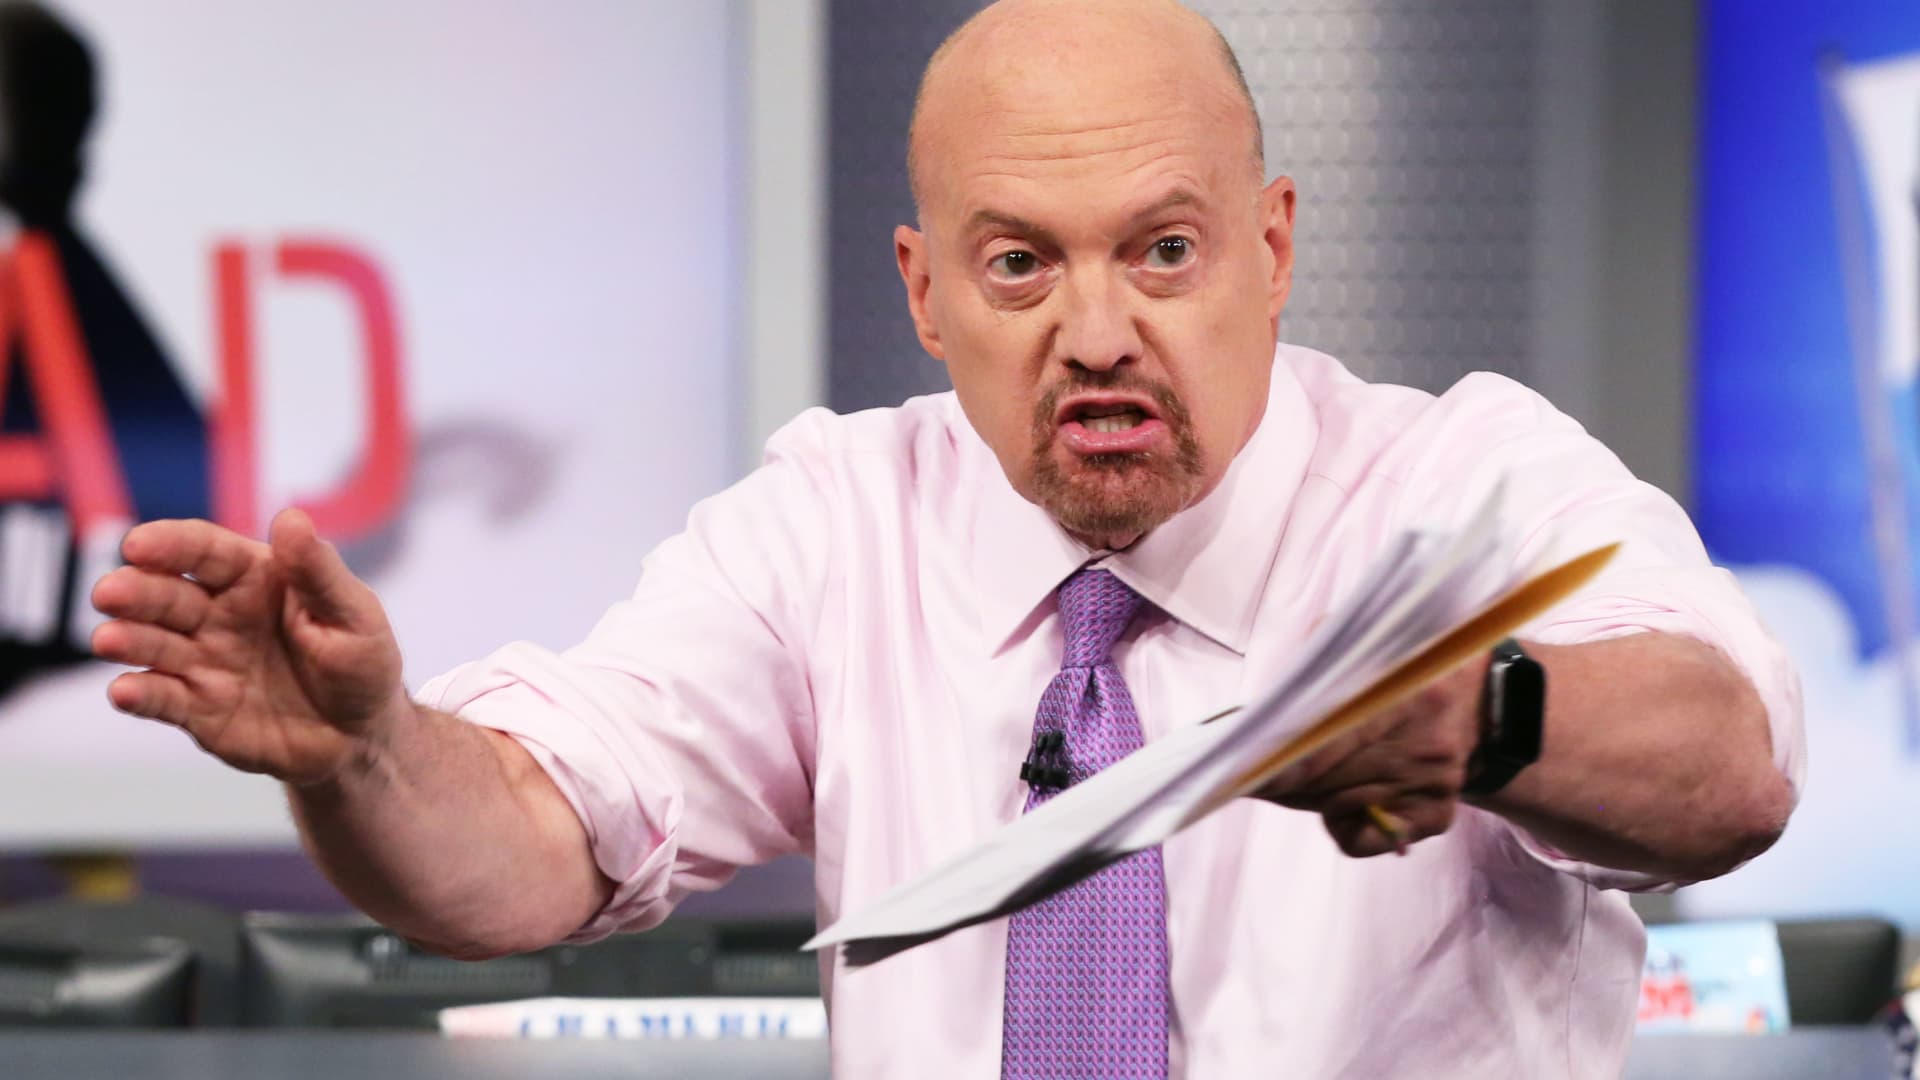 The market could reach an ‘investable’ bottom after analysts cut earnings estimates, Jim Cramer says